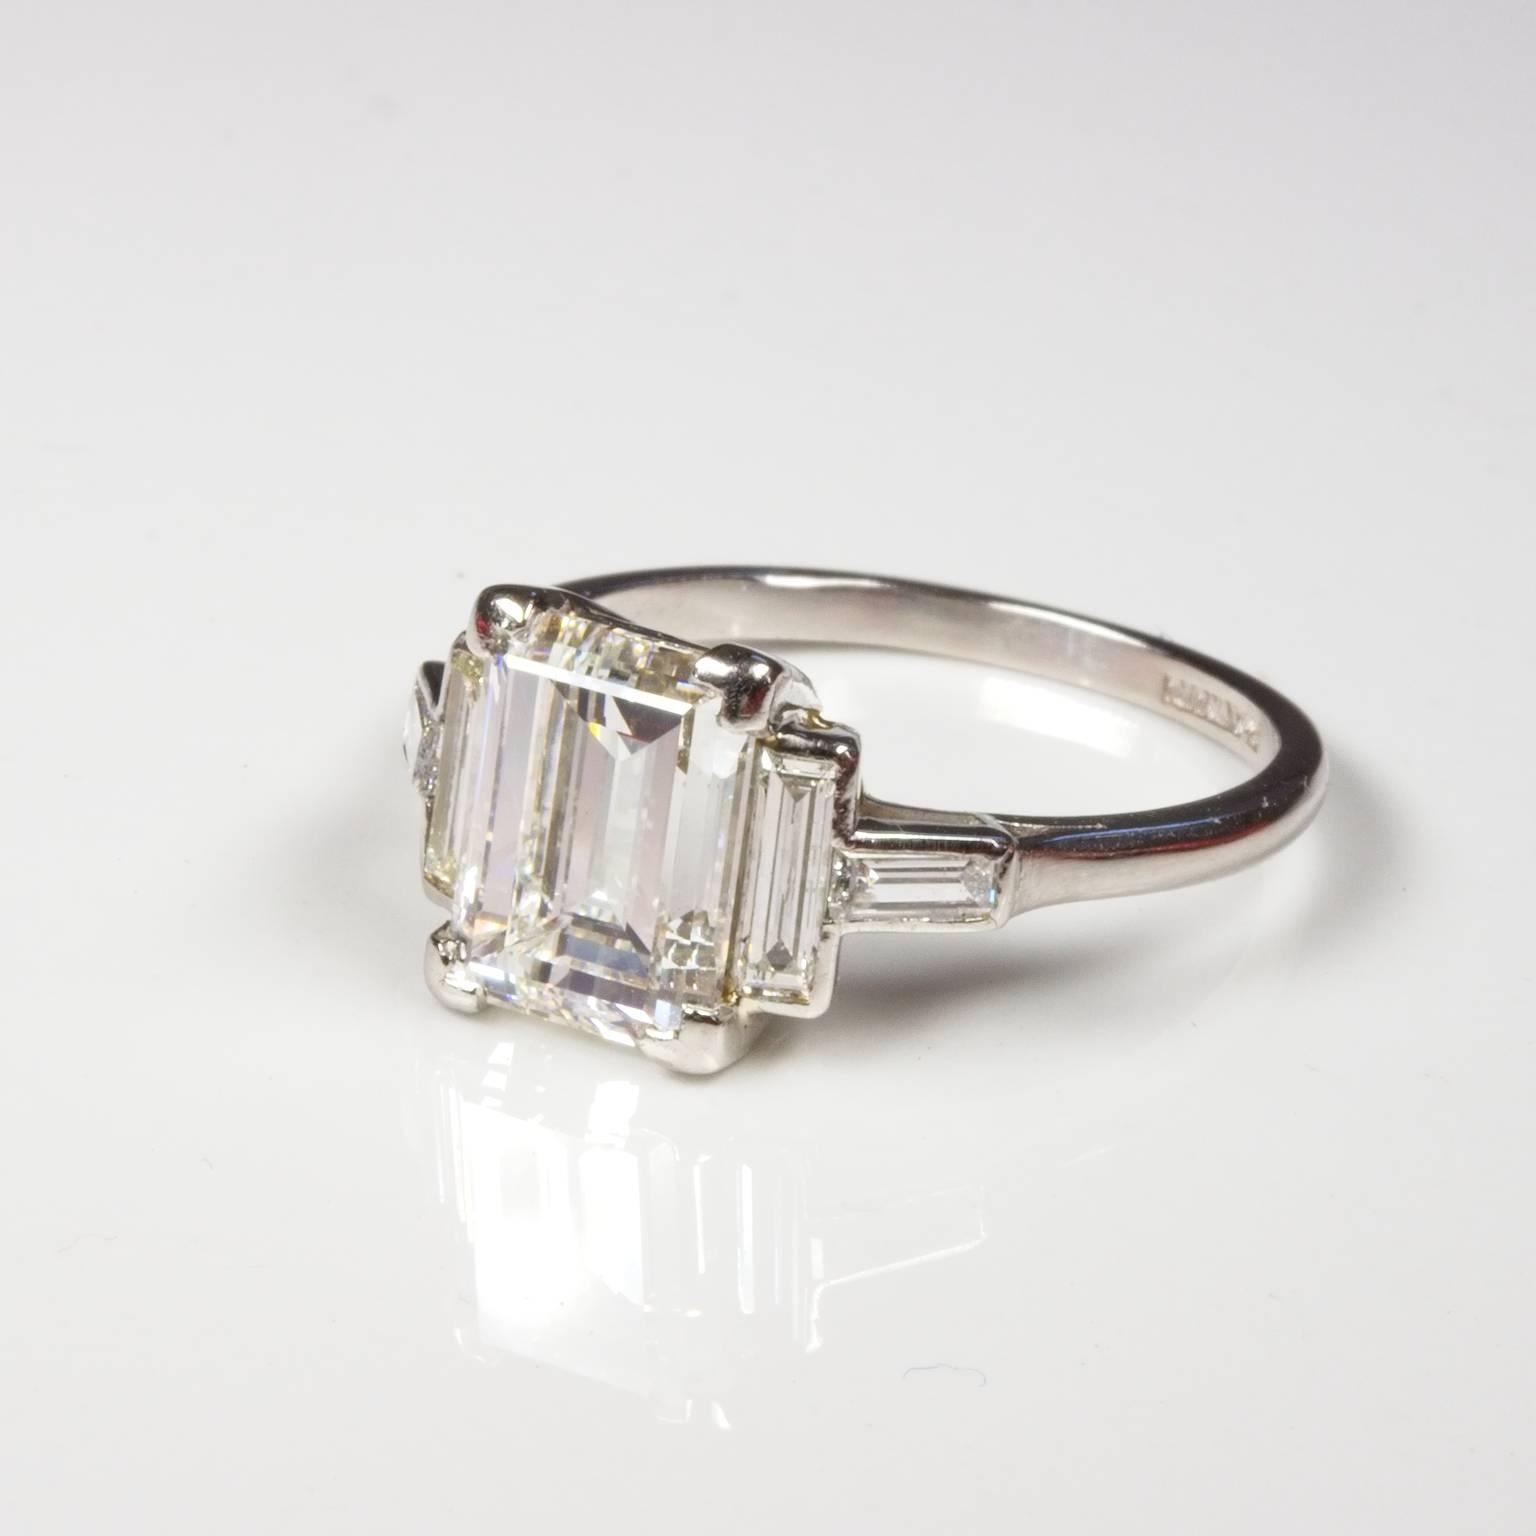 Absolutely stunning art deco platinum diamond engagement ring set with a centre emerald cut diamond of 2.67ct F/VS1 and 4 baguette cut shoulder diamonds of total weight 0.60ct G/VS. What a find!  Currently size S (US=9) and will be safely sized by